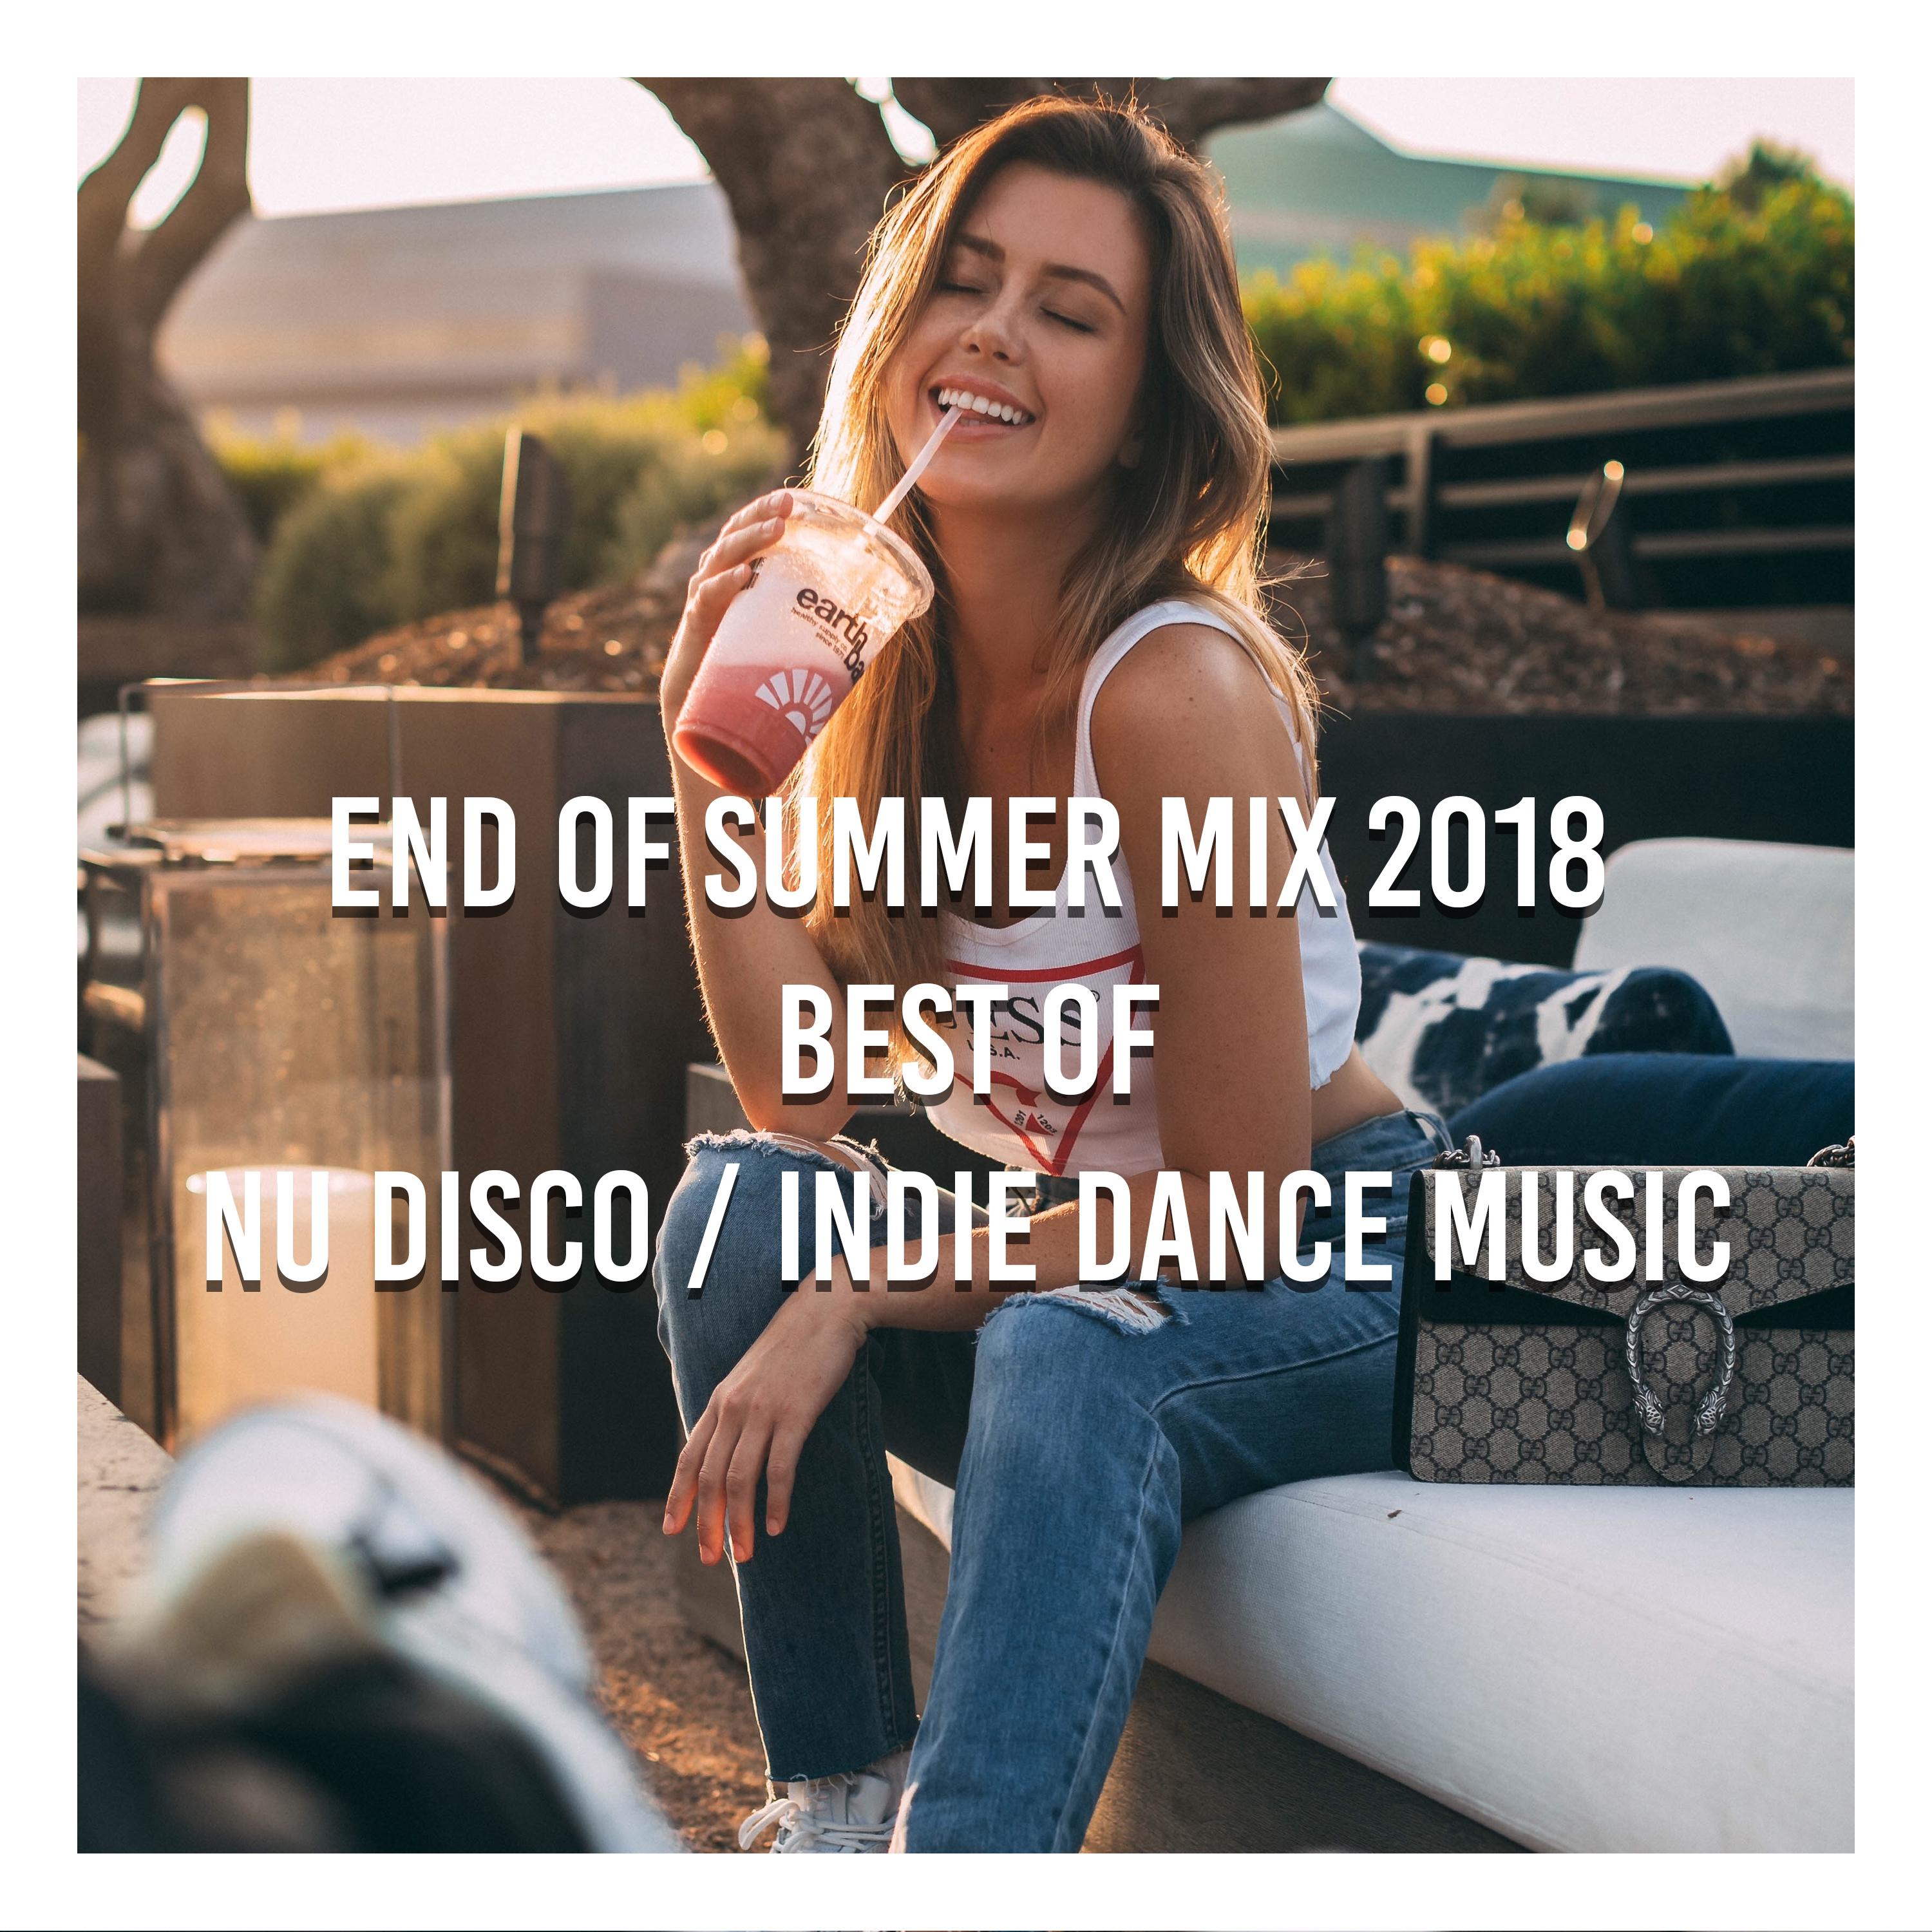 End of Summer Mix 2018 Best of Nu Disco / Indie Dance Music (Compiled and Mixed by Gerti Prenjasi)